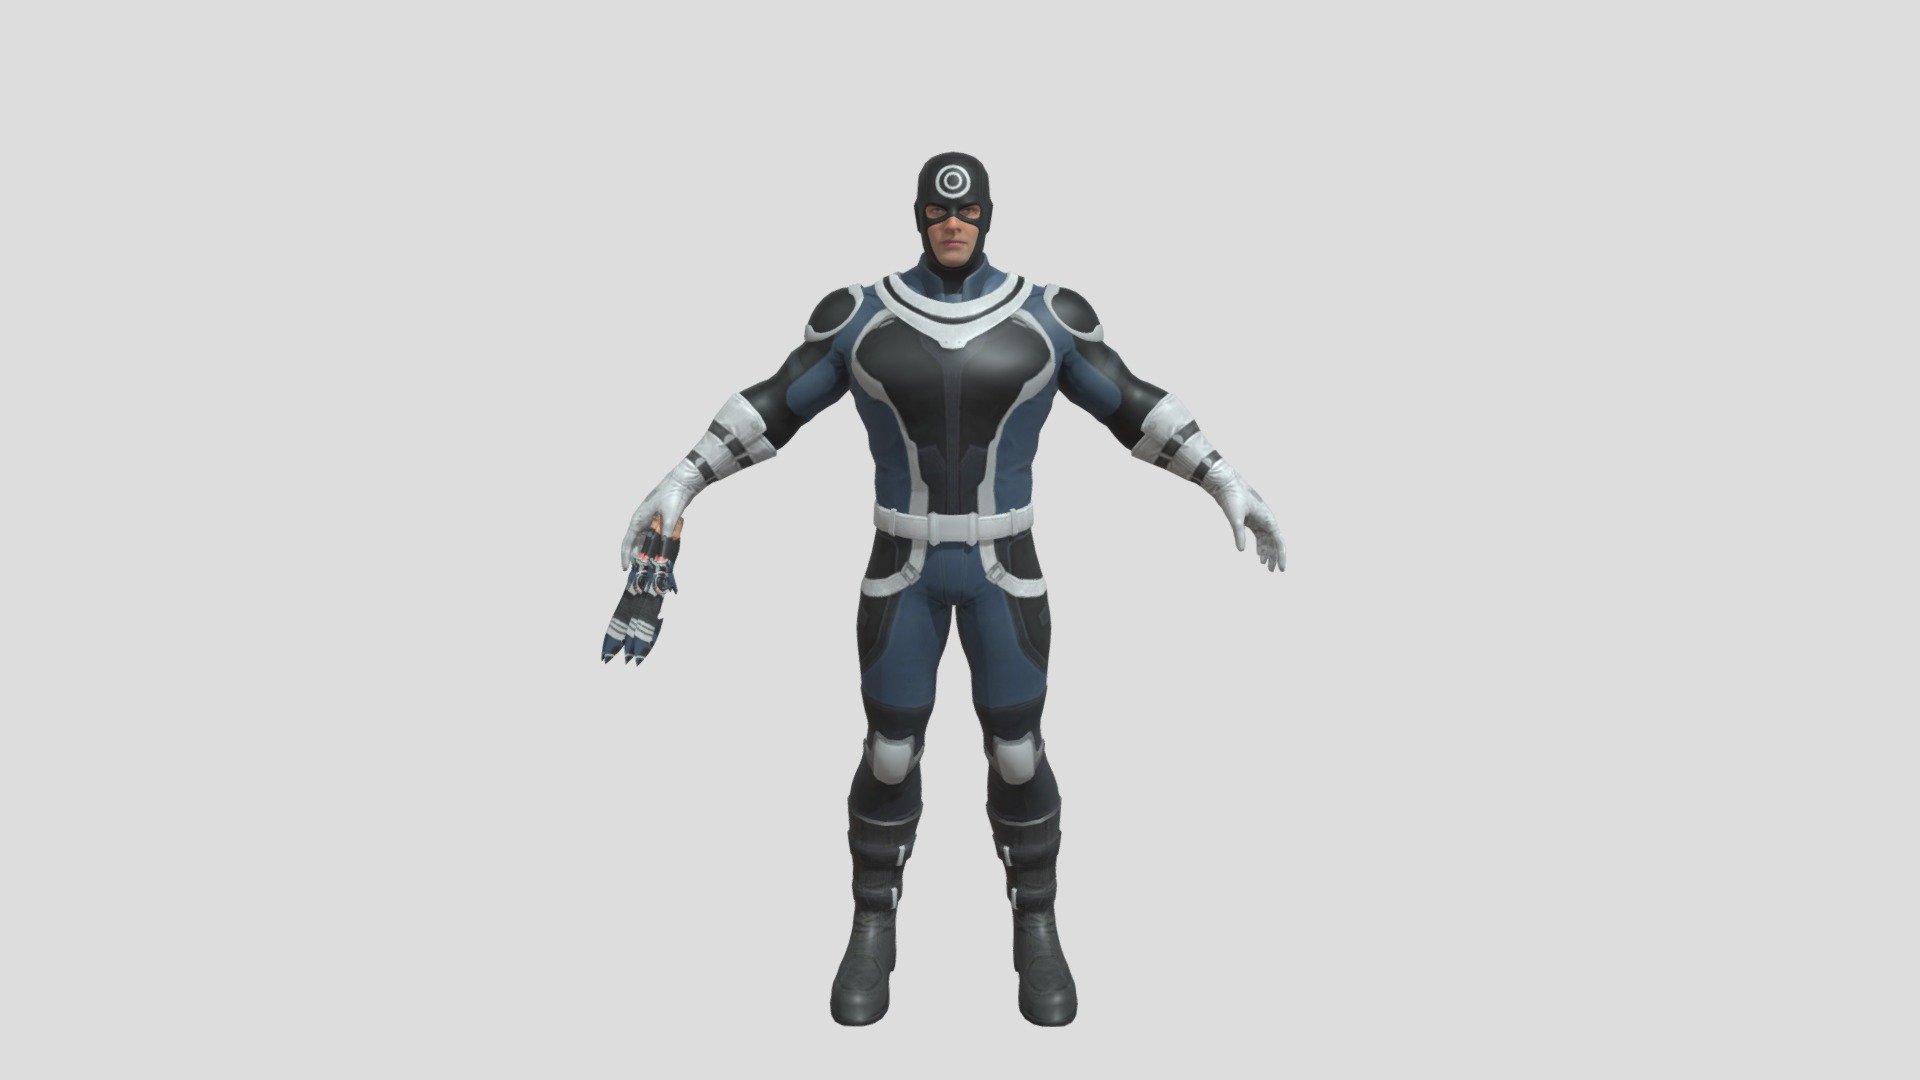 Bullseye is a supervillain appearing in American comic books published by Marvel Comics, This Model Is Well Textured Or Rigged, You Can Download It And Can Use On Your Animations

File Format : 
•FBX
•PNG - Bullseye(Textured)(Rigged) - Download Free 3D model by CAPTAAINR 3d model